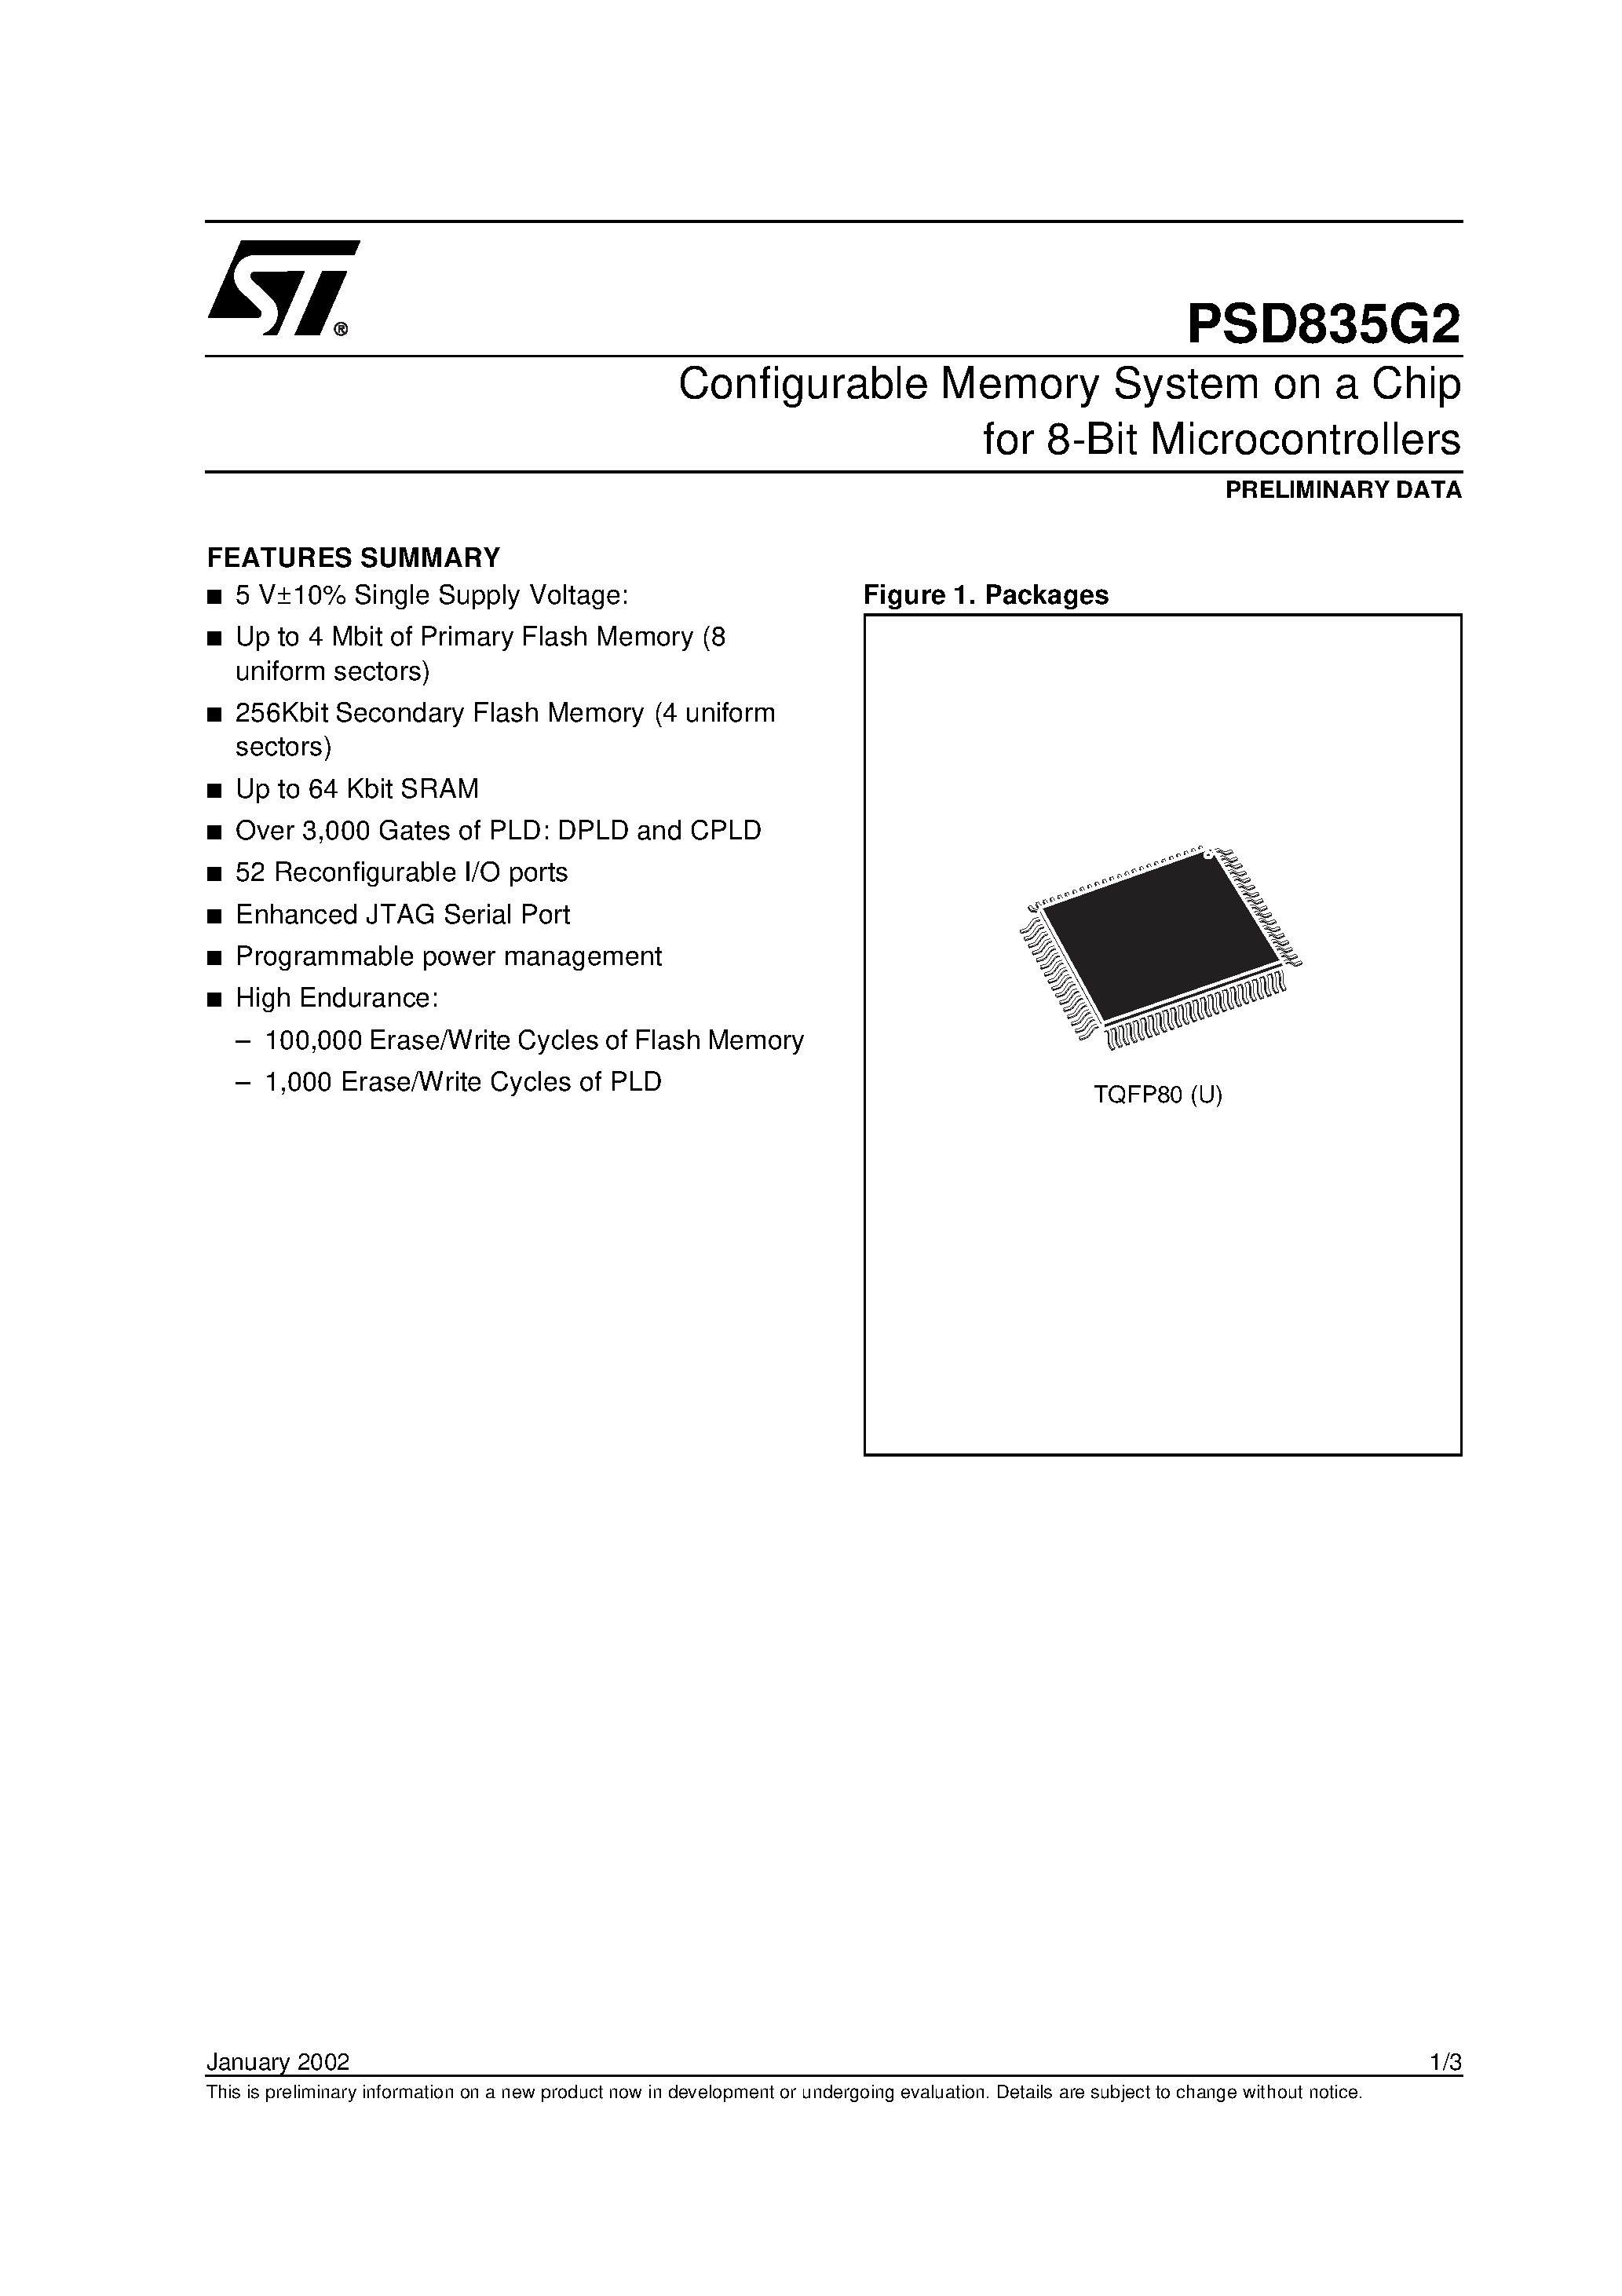 Datasheet PSD835F2V-A-90B81I - Configurable Memory System on a Chip for 8-Bit Microcontrollers page 1